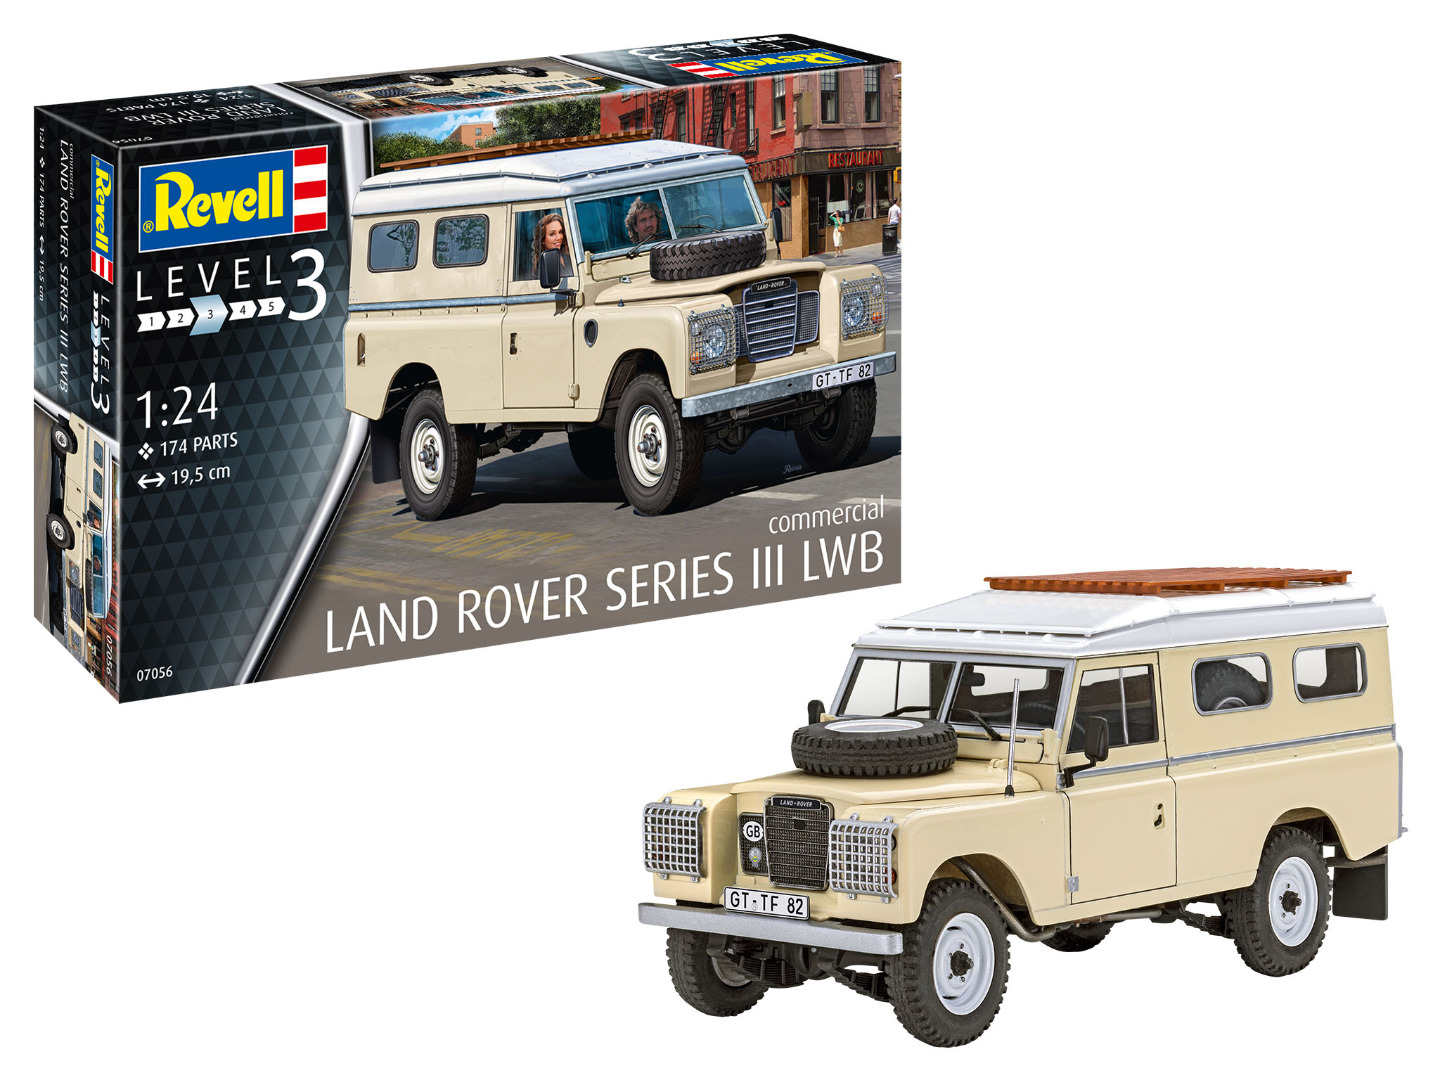 Revell Model Kit  Land Rover Series III LWB (Commercial) Scale 1:24